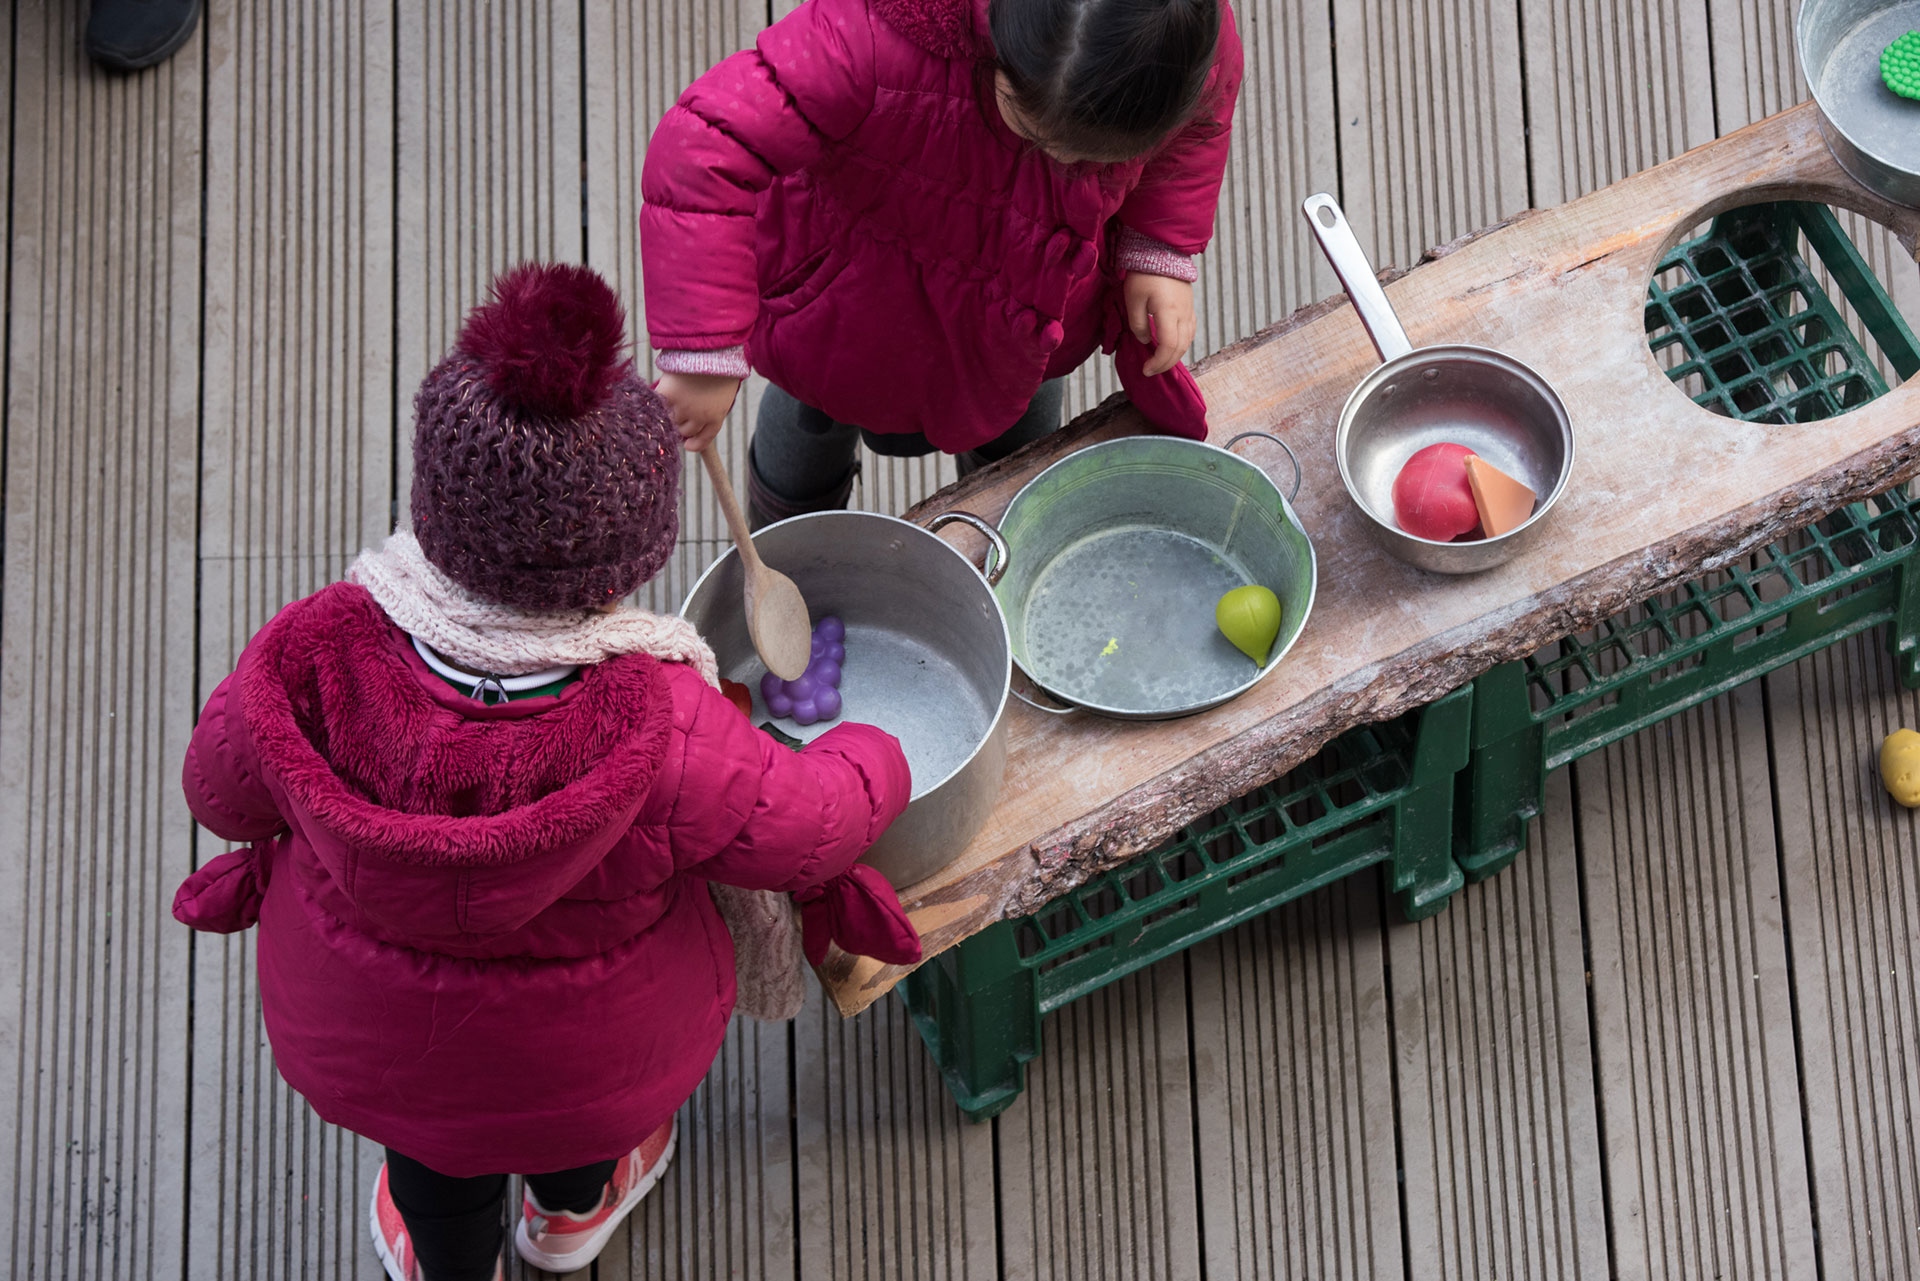 Children playing with plastic cooking equipment and food